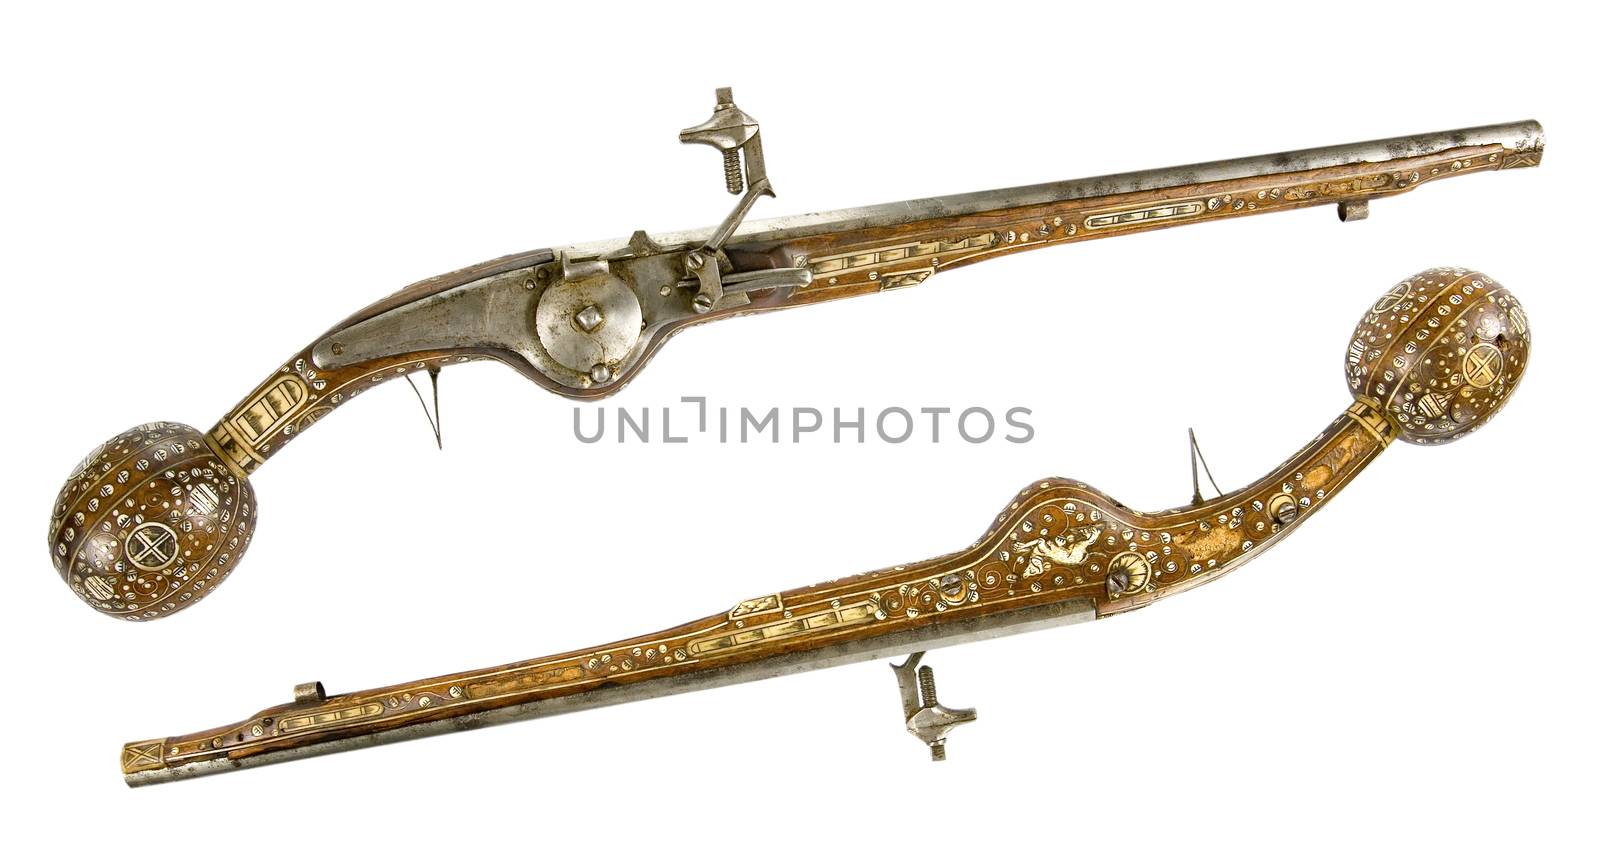 Old pistol inlaid with bone and enamel. Ceremonial weapon